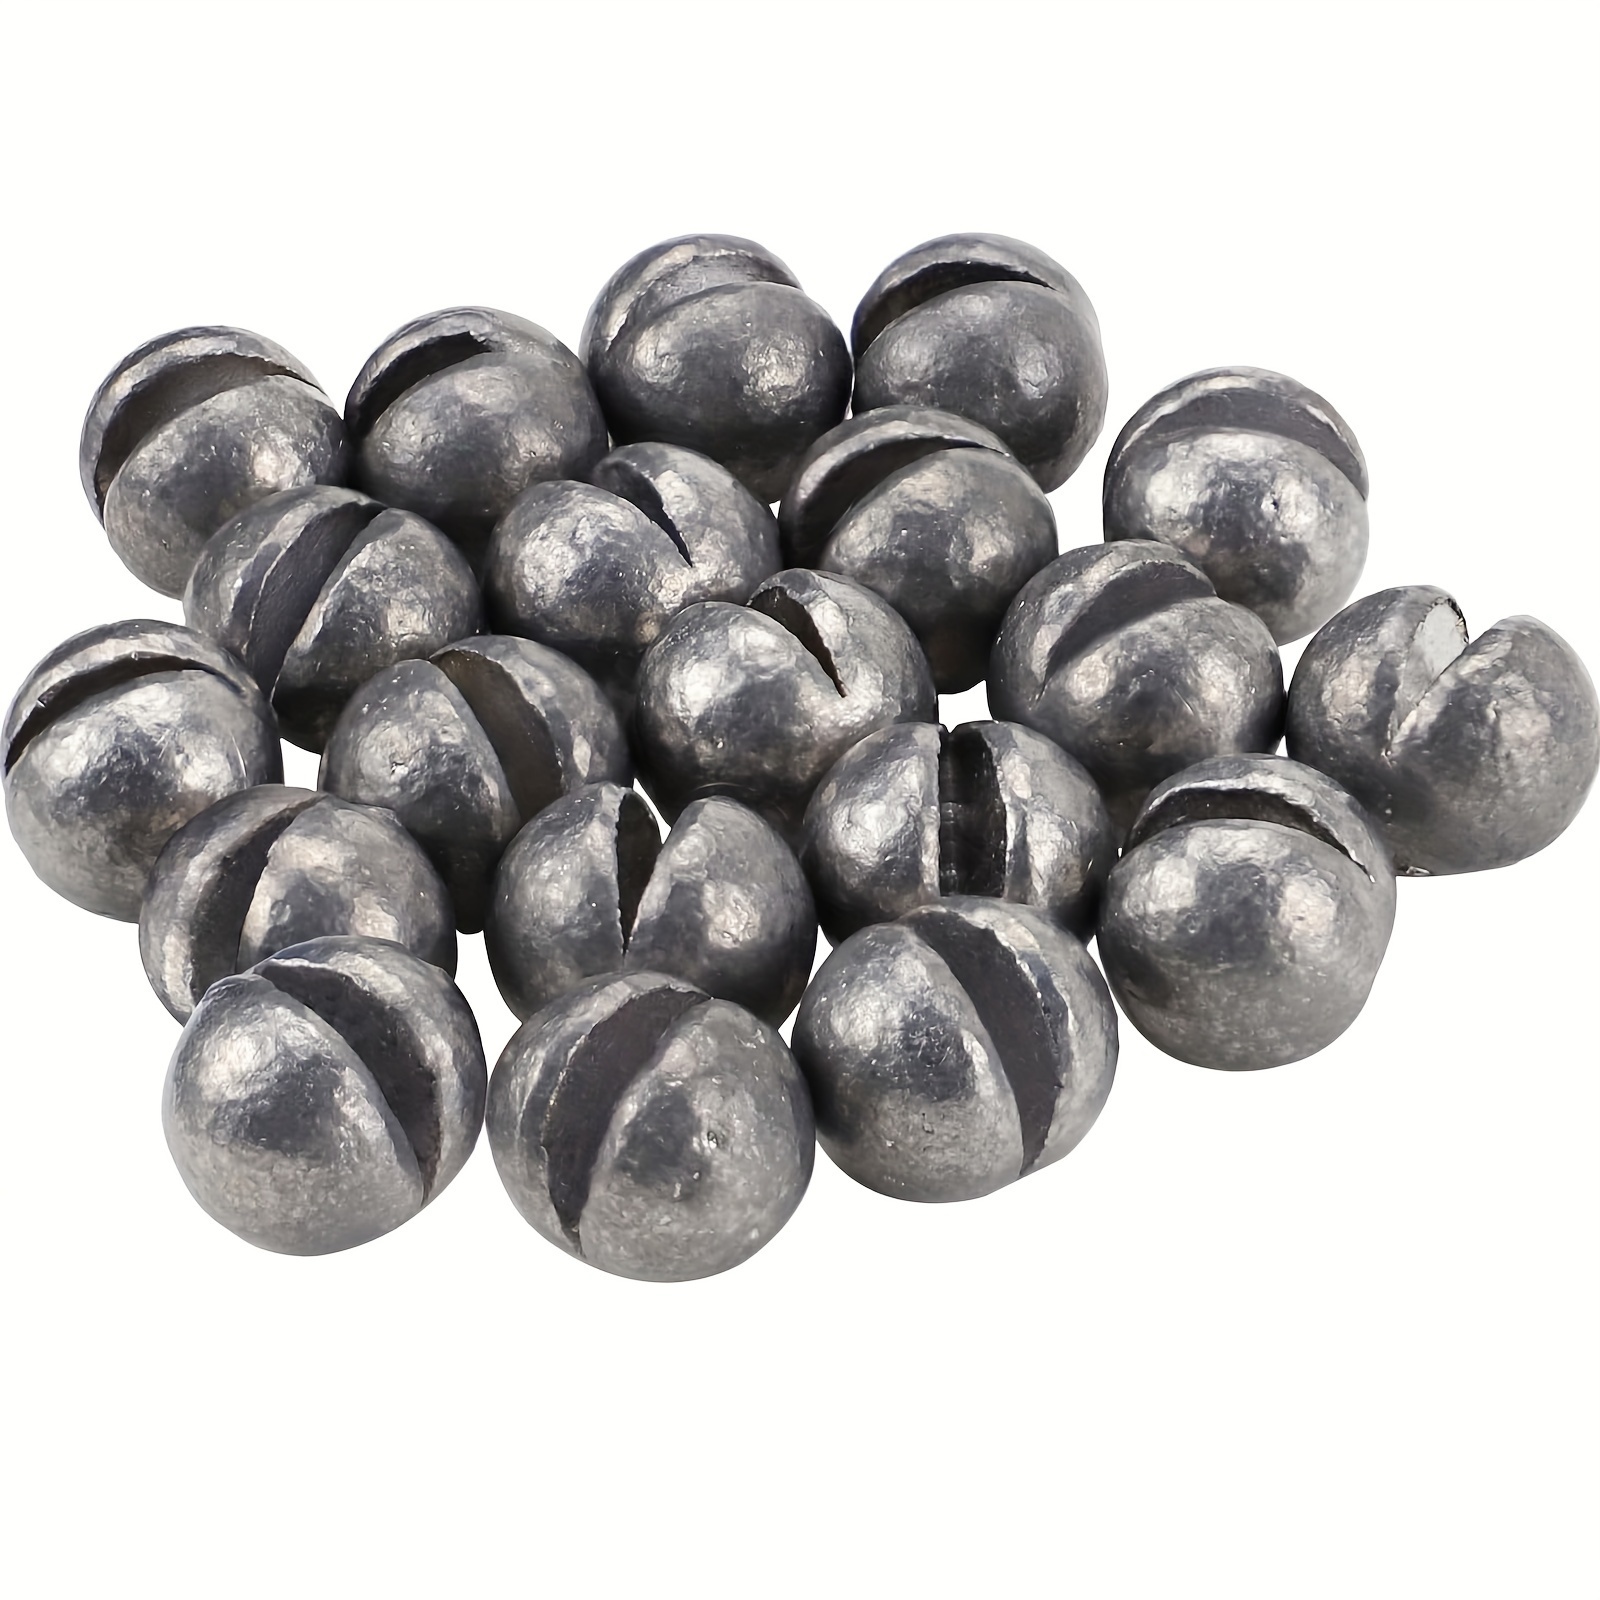 100pcs * Premium Split Shot Fishing Weights - Removable Round Sinkers in 5  Sizes for Accurate Casting and Better Fishing Results